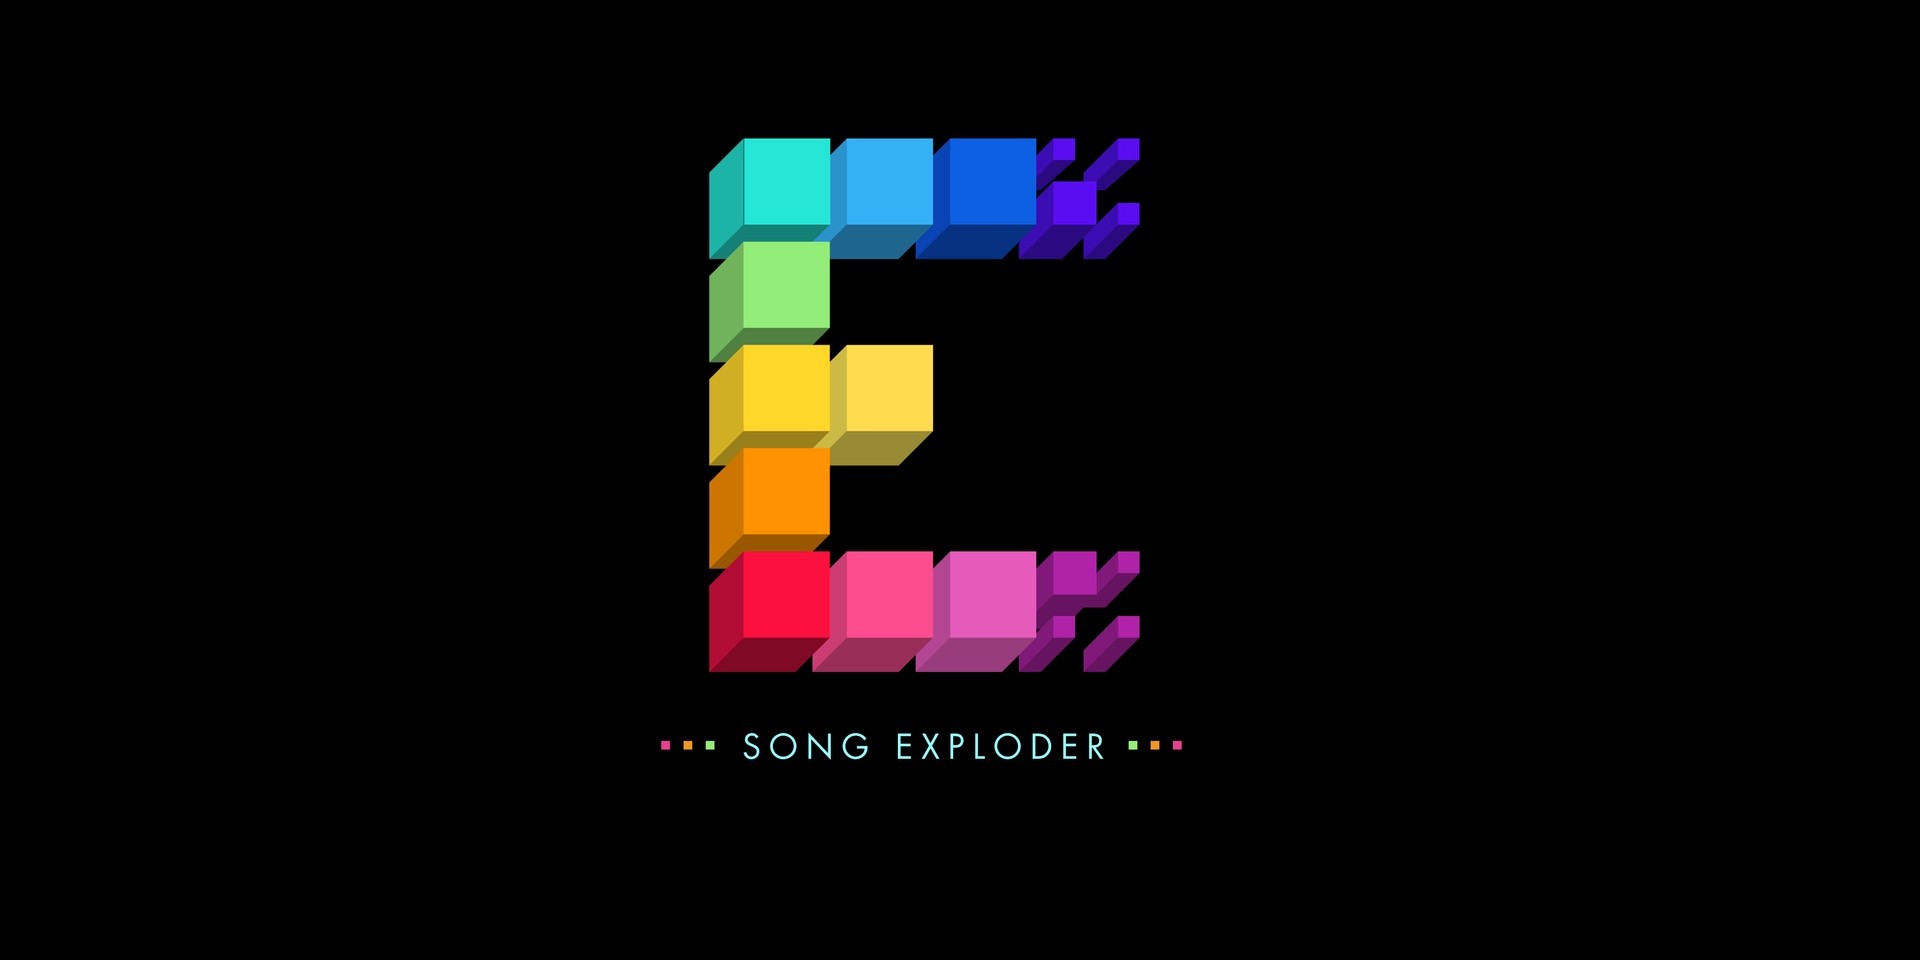 Music podcast Song Exploder is heading to Netflix